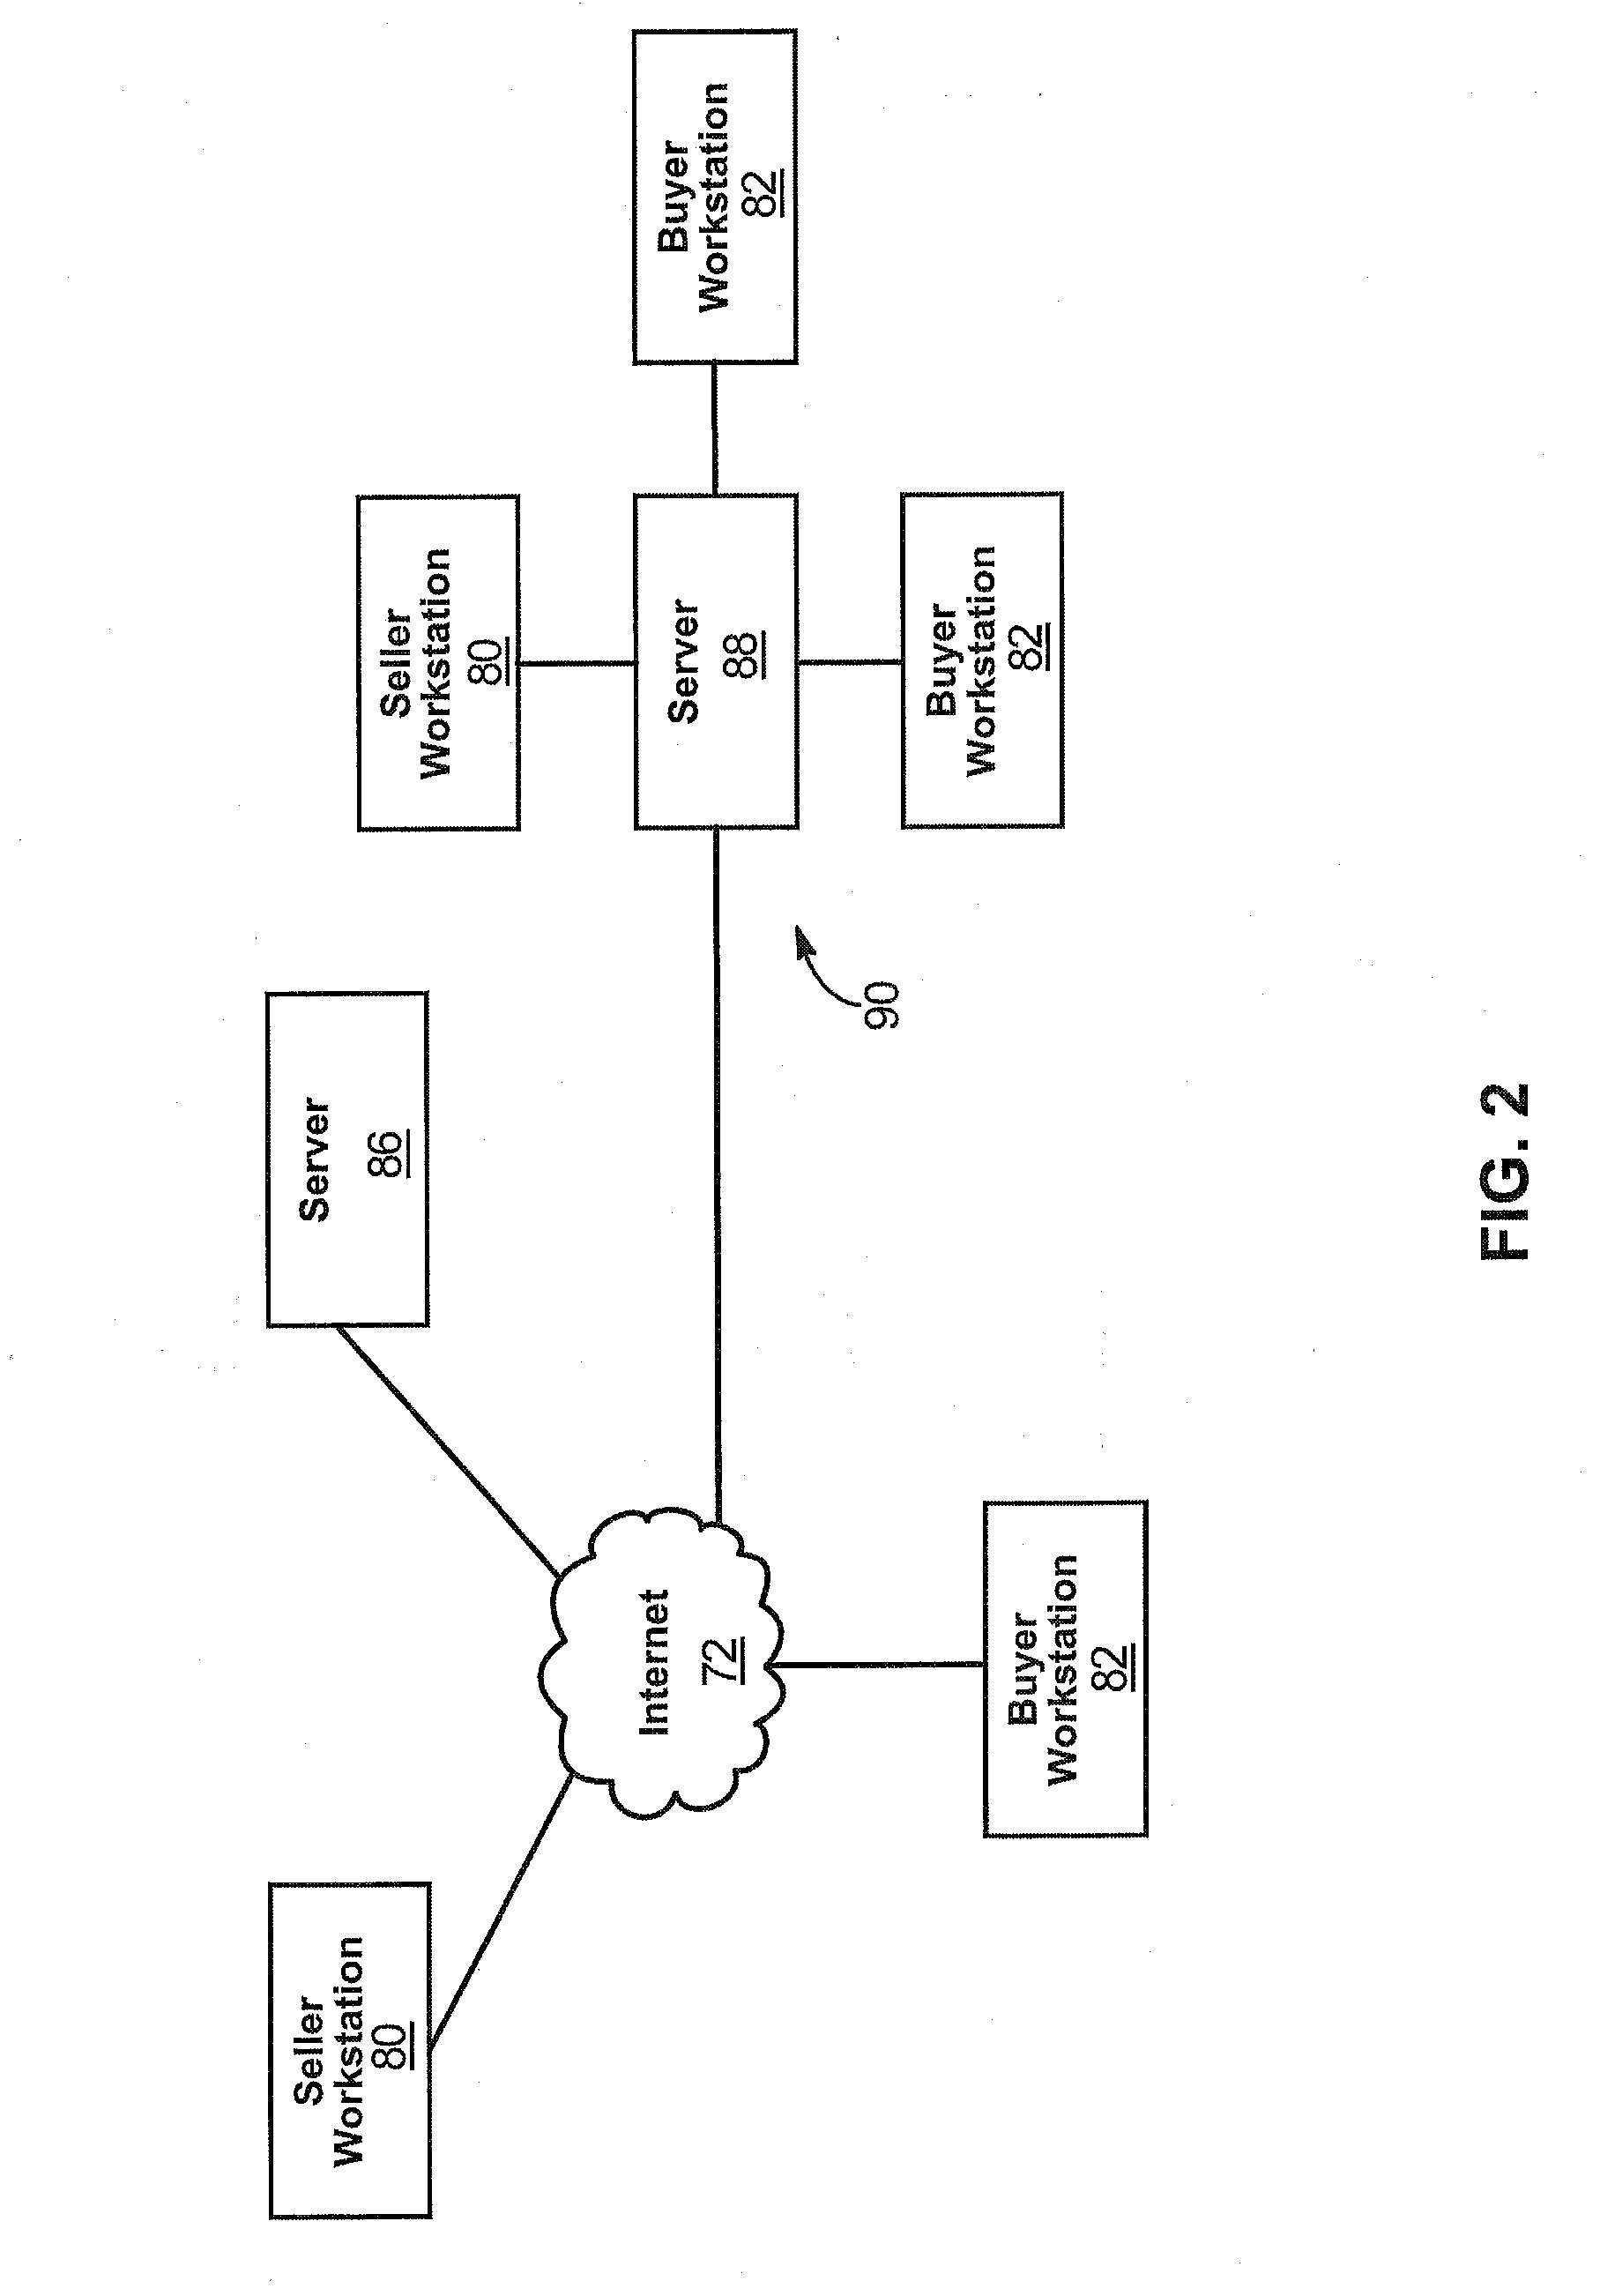 Online transaction hosting apparatus and method